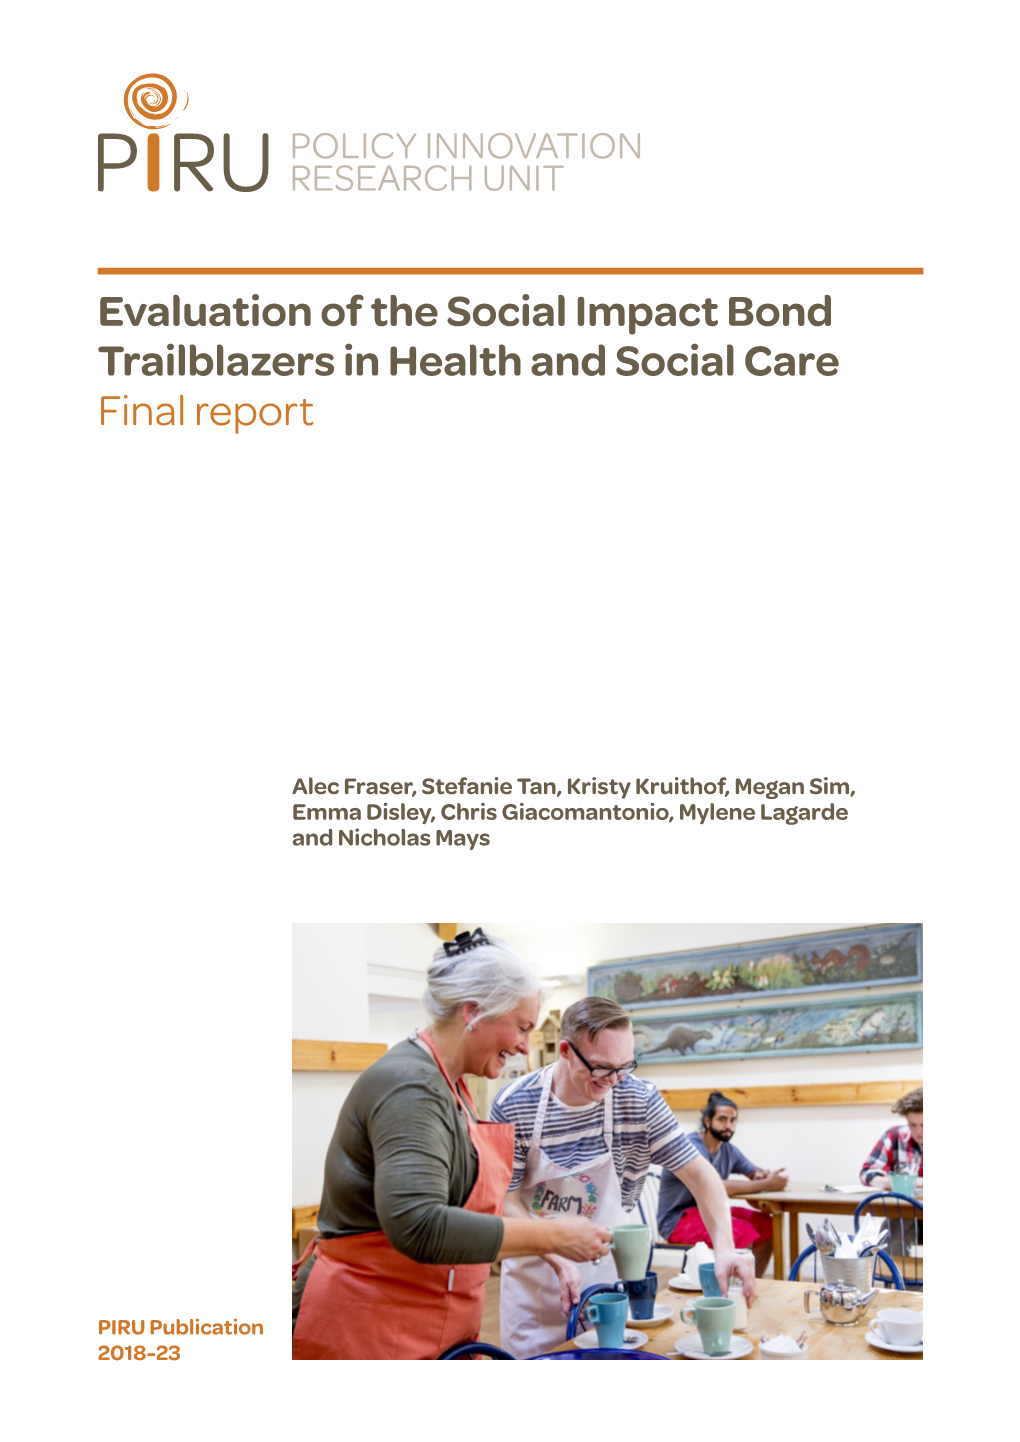 Evaluation of the Social Impact Bond Trailblazers in Health and Social Care Final Report